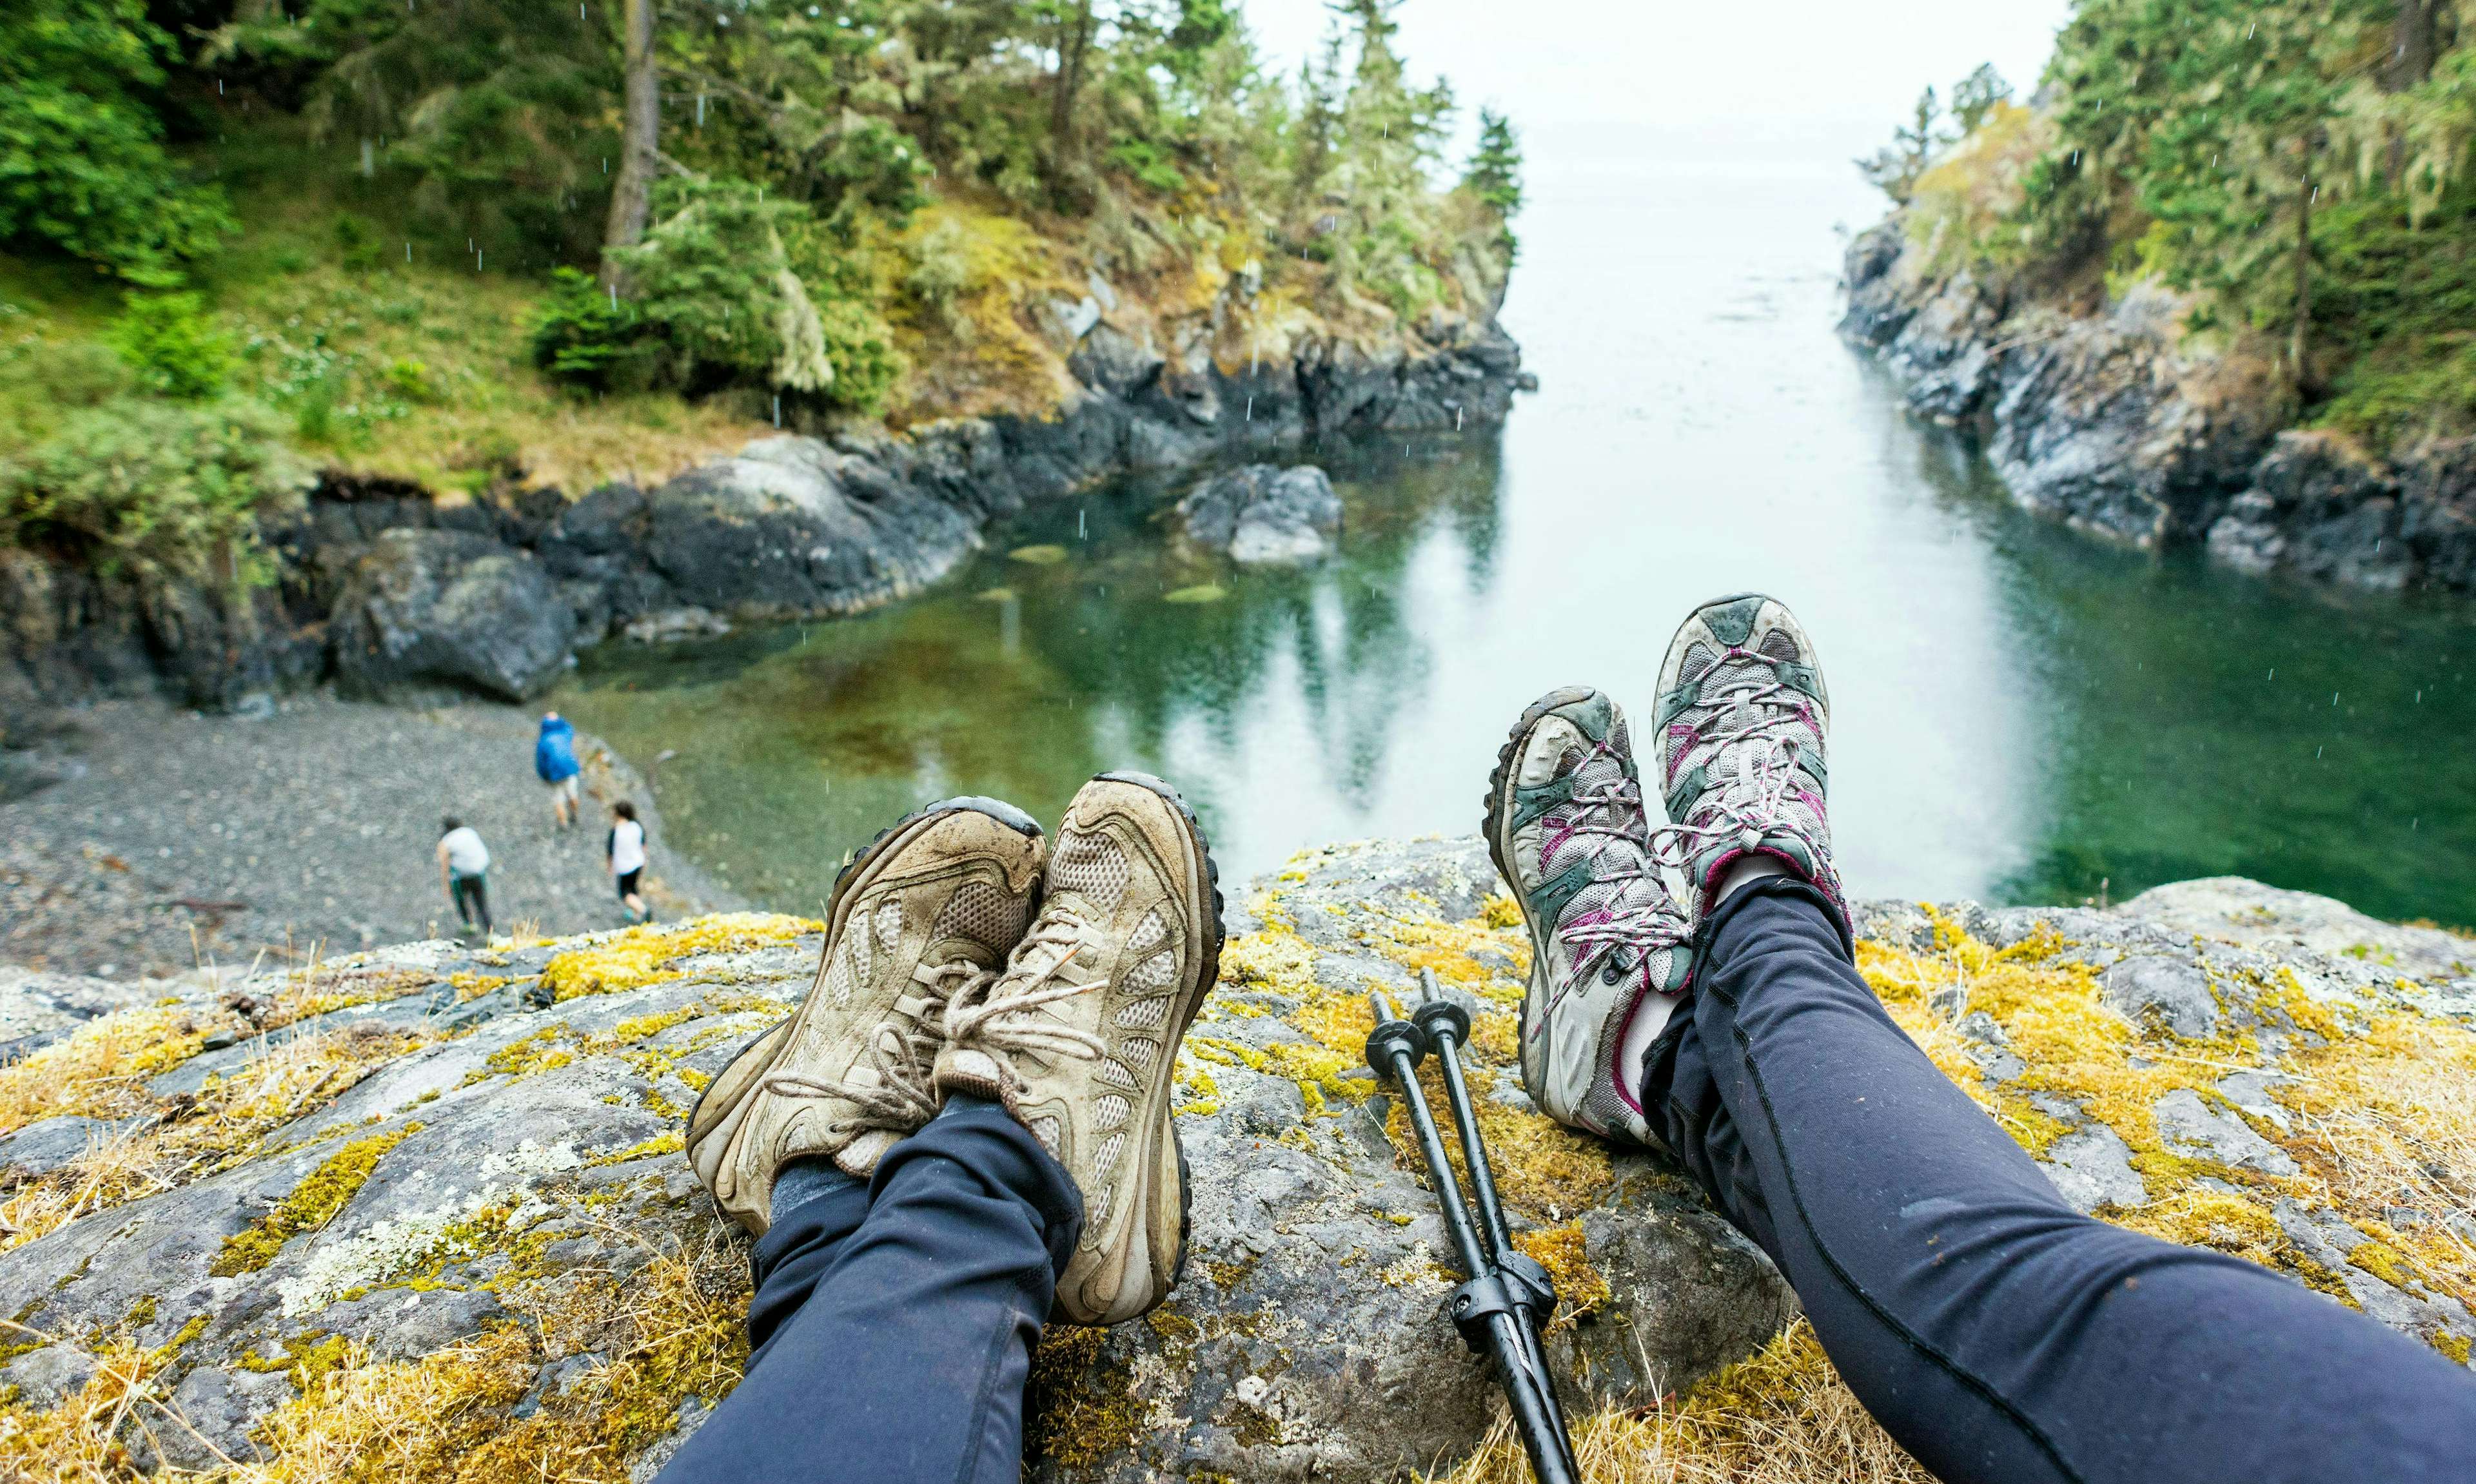 Hiking boots near the edge of a cliff